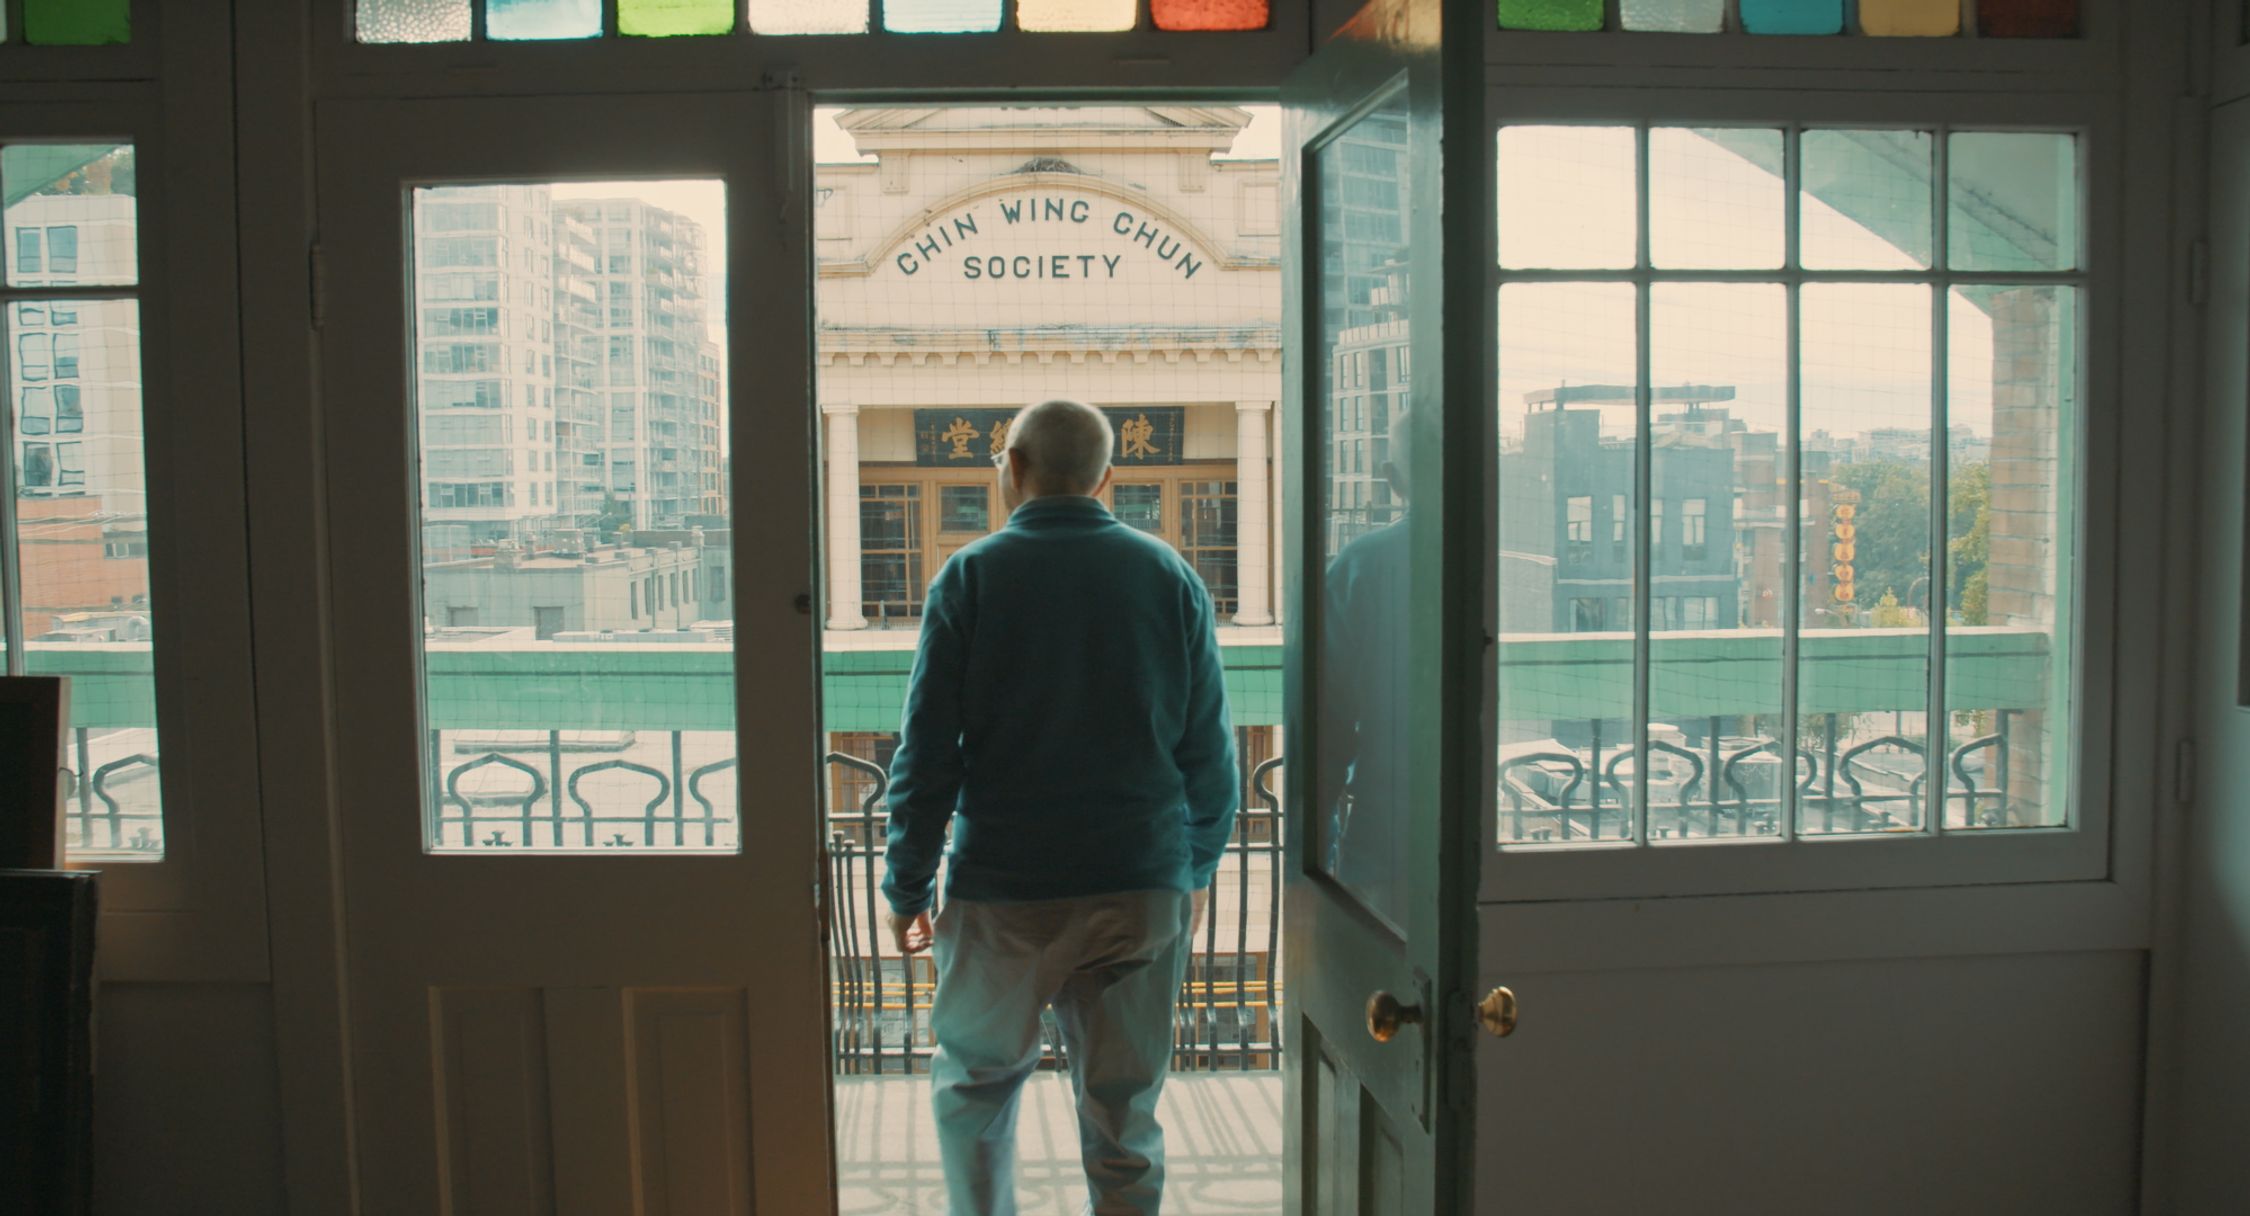 An individual is standing at an open doorway, facing a balcony and looking out at an urban landscape. The sign above the balcony reads "CHIN WING CHUN SOCIETY" in English and has Chinese characters beneath it. The view includes modern buildings, and the doorway is framed with colourful glass panes, suggesting a traditional or historical setting within a contemporary city environment.